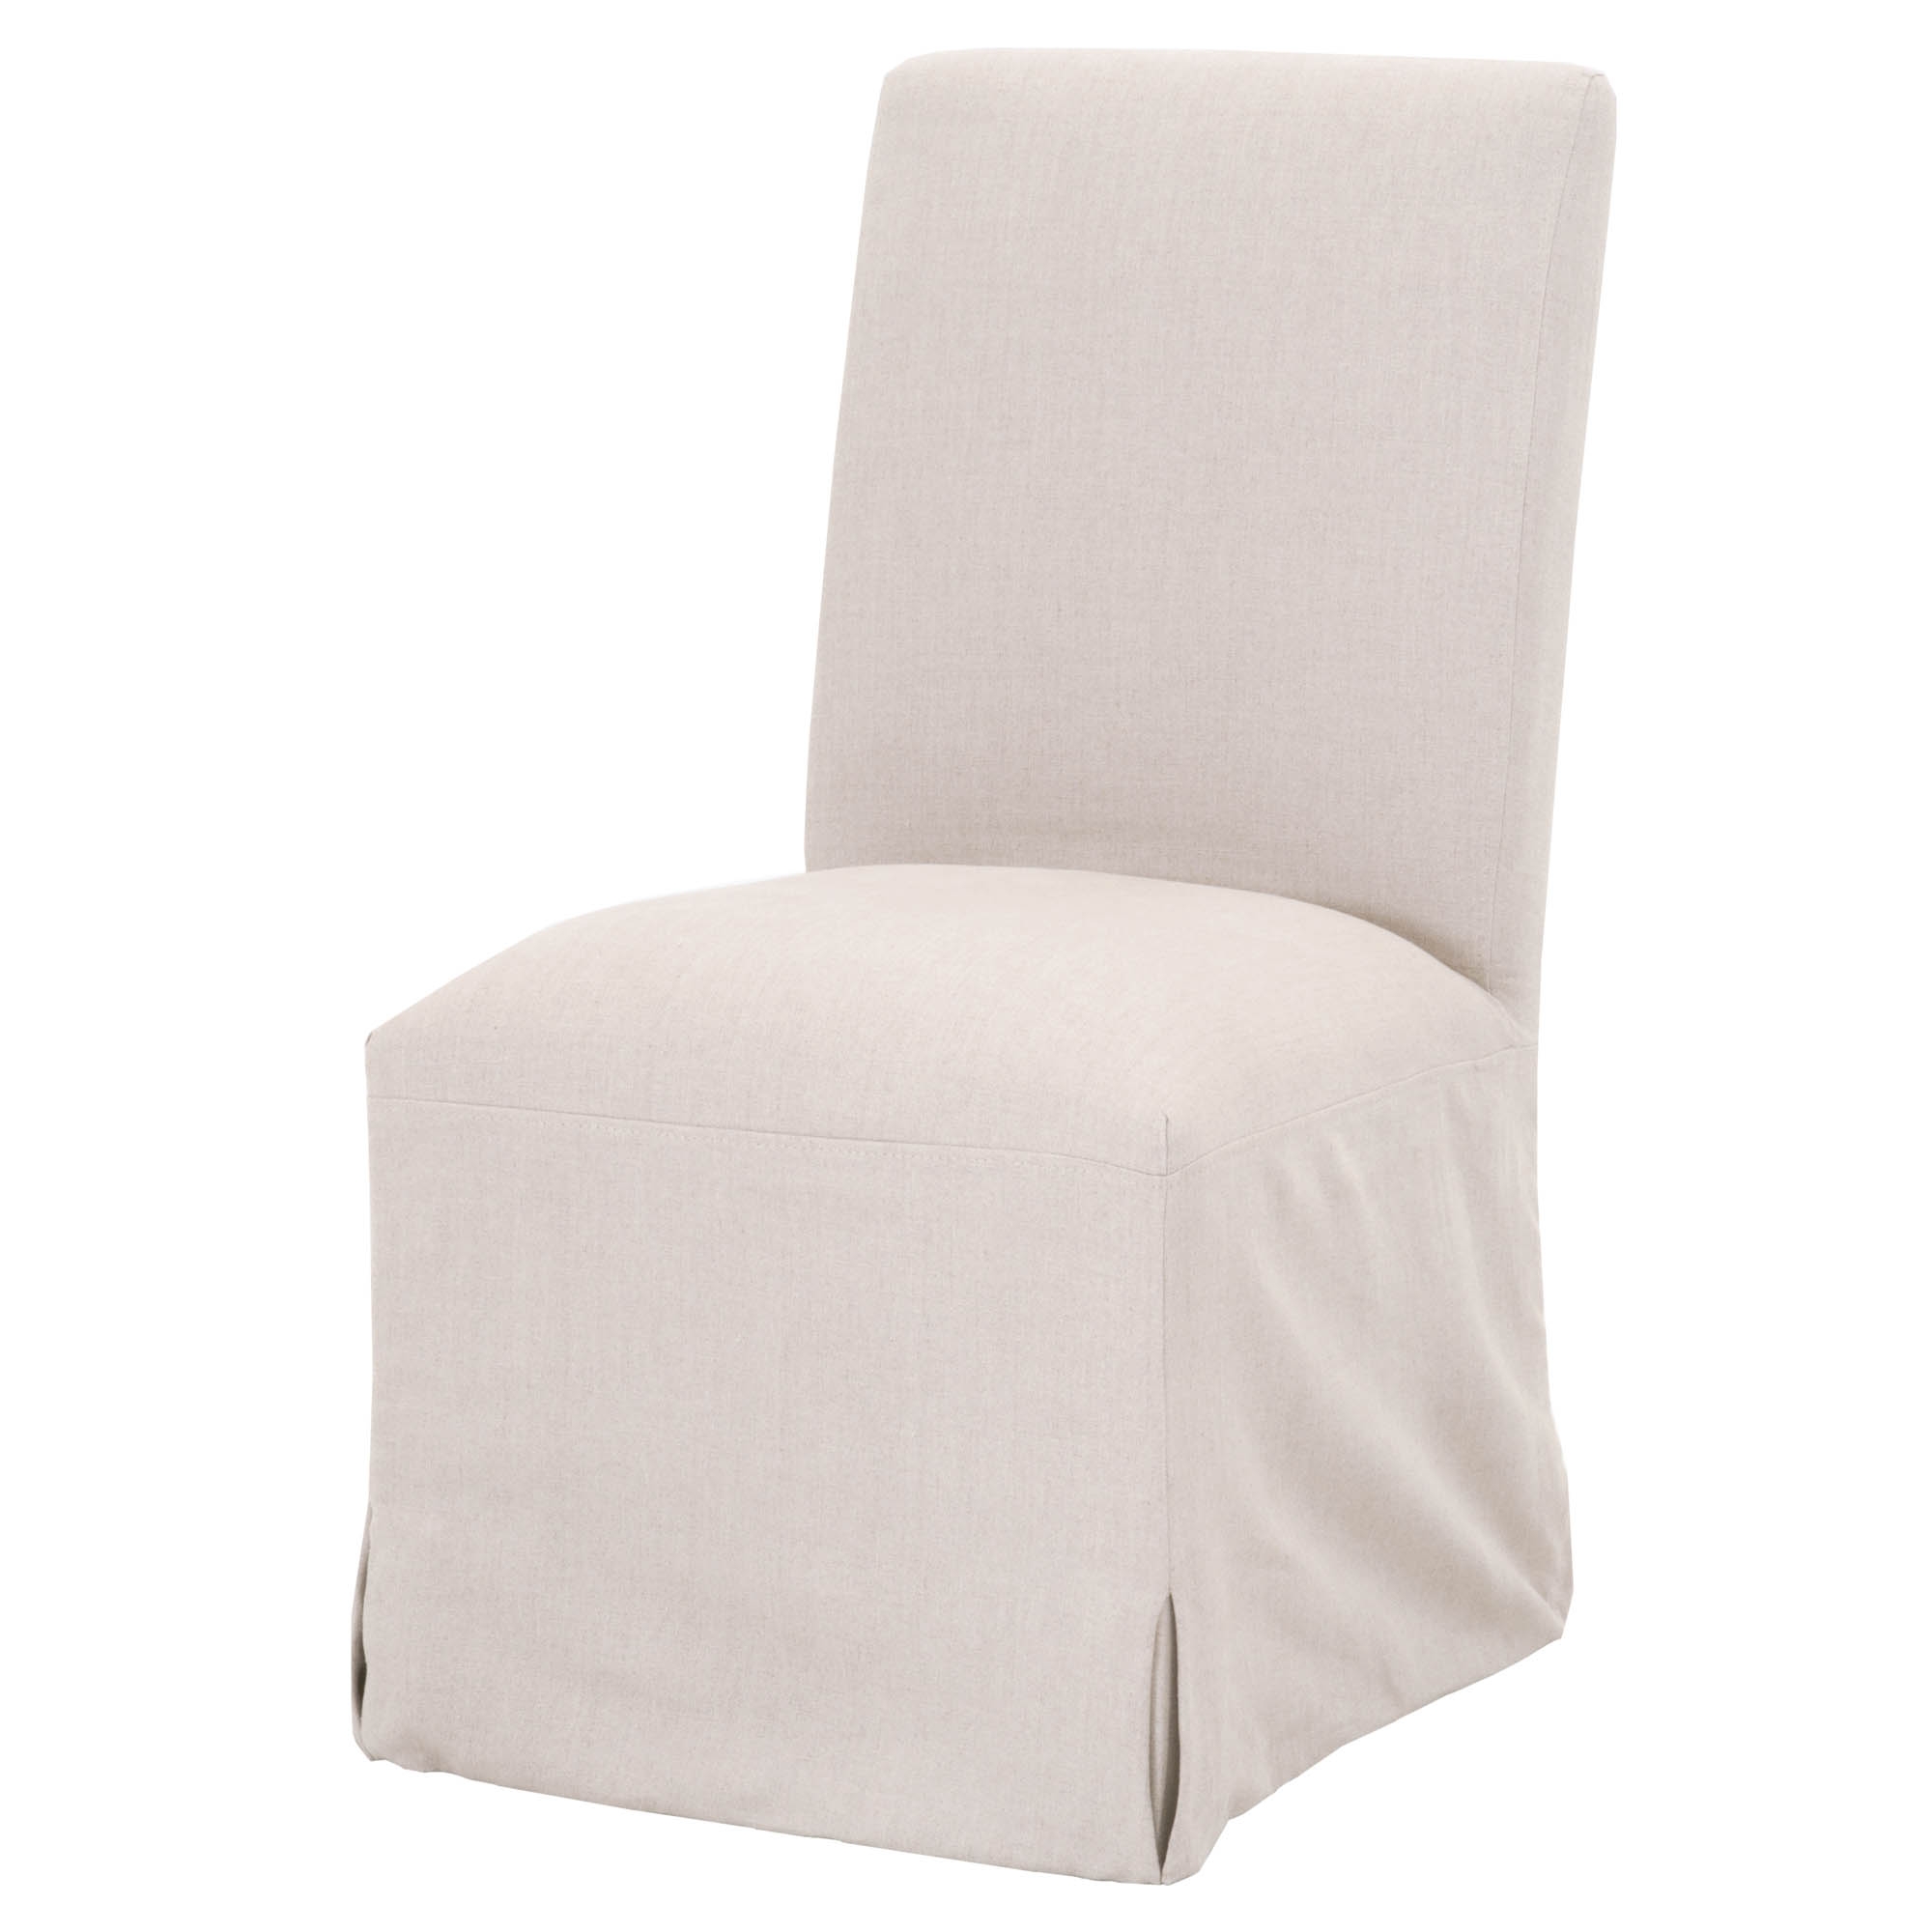 Levi Dining Chair, Set of 2 - Image 1